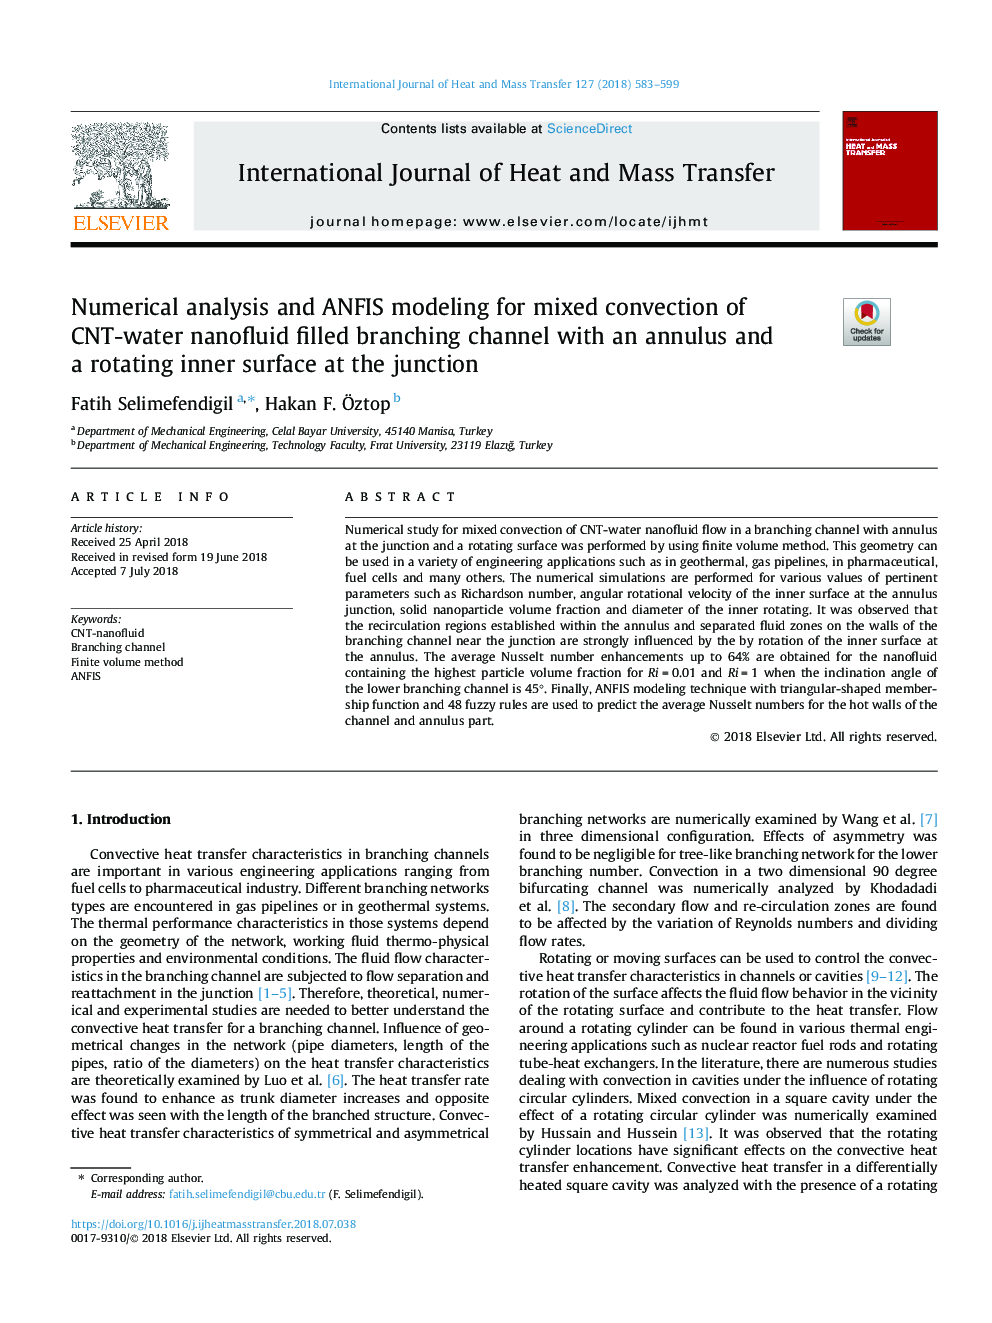 Numerical analysis and ANFIS modeling for mixed convection of CNT-water nanofluid filled branching channel with an annulus and a rotating inner surface at the junction